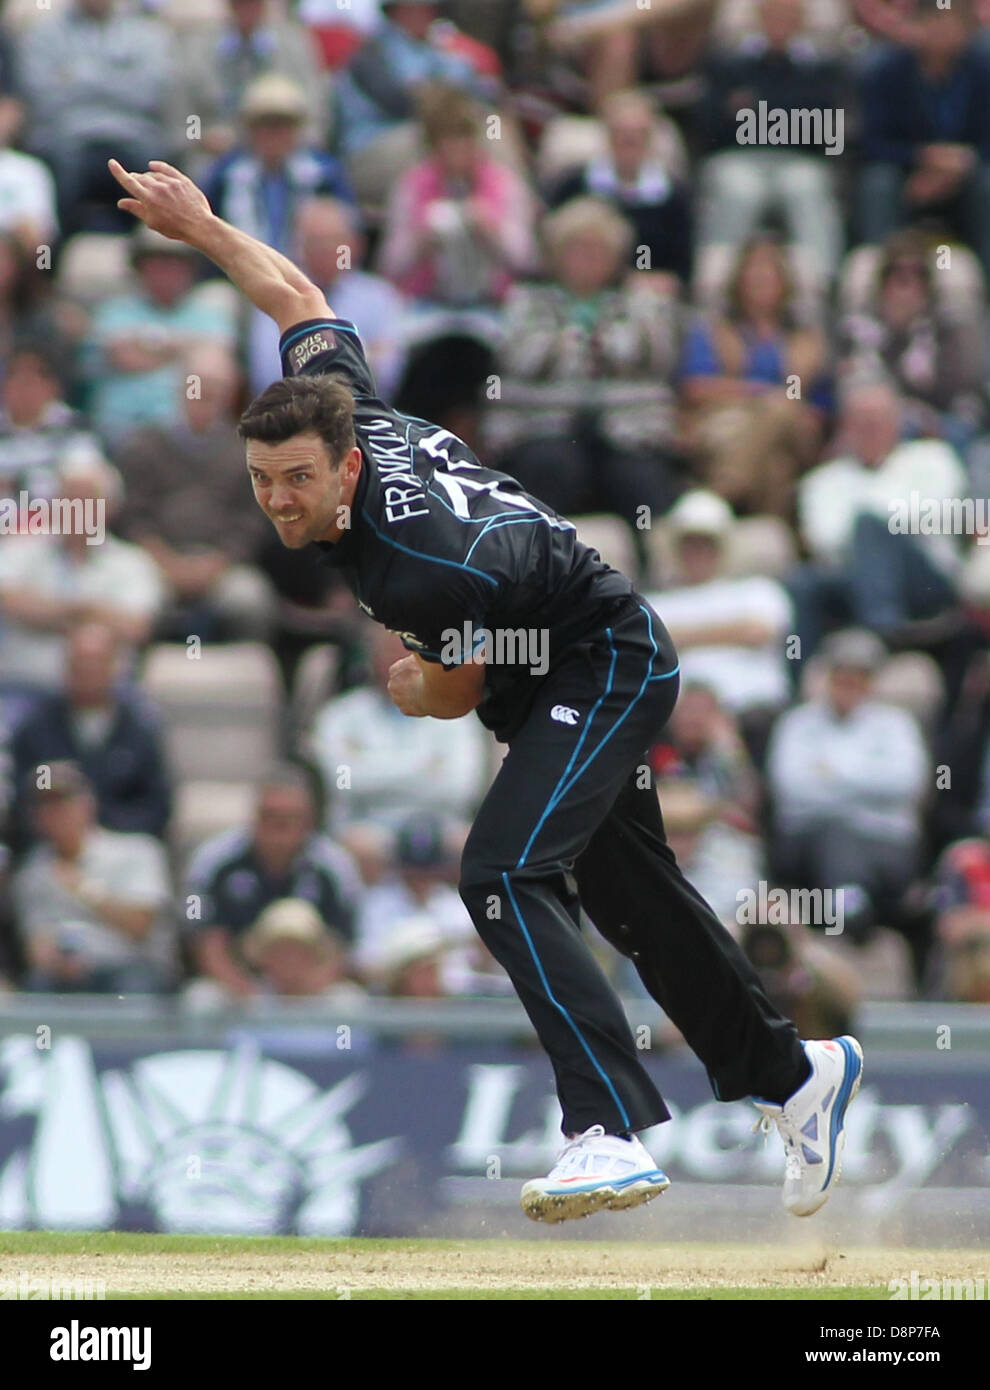 SOUTHAMPTON, ENGLAND - June 02: New Zealand's James Franklin bowling during the 2nd Nat West one day international cricket match between England and New Zealand at Lords Cricket Ground on June 02, 2013 in London, England, (Photo by Mitchell Gunn/ESPA) Stock Photo